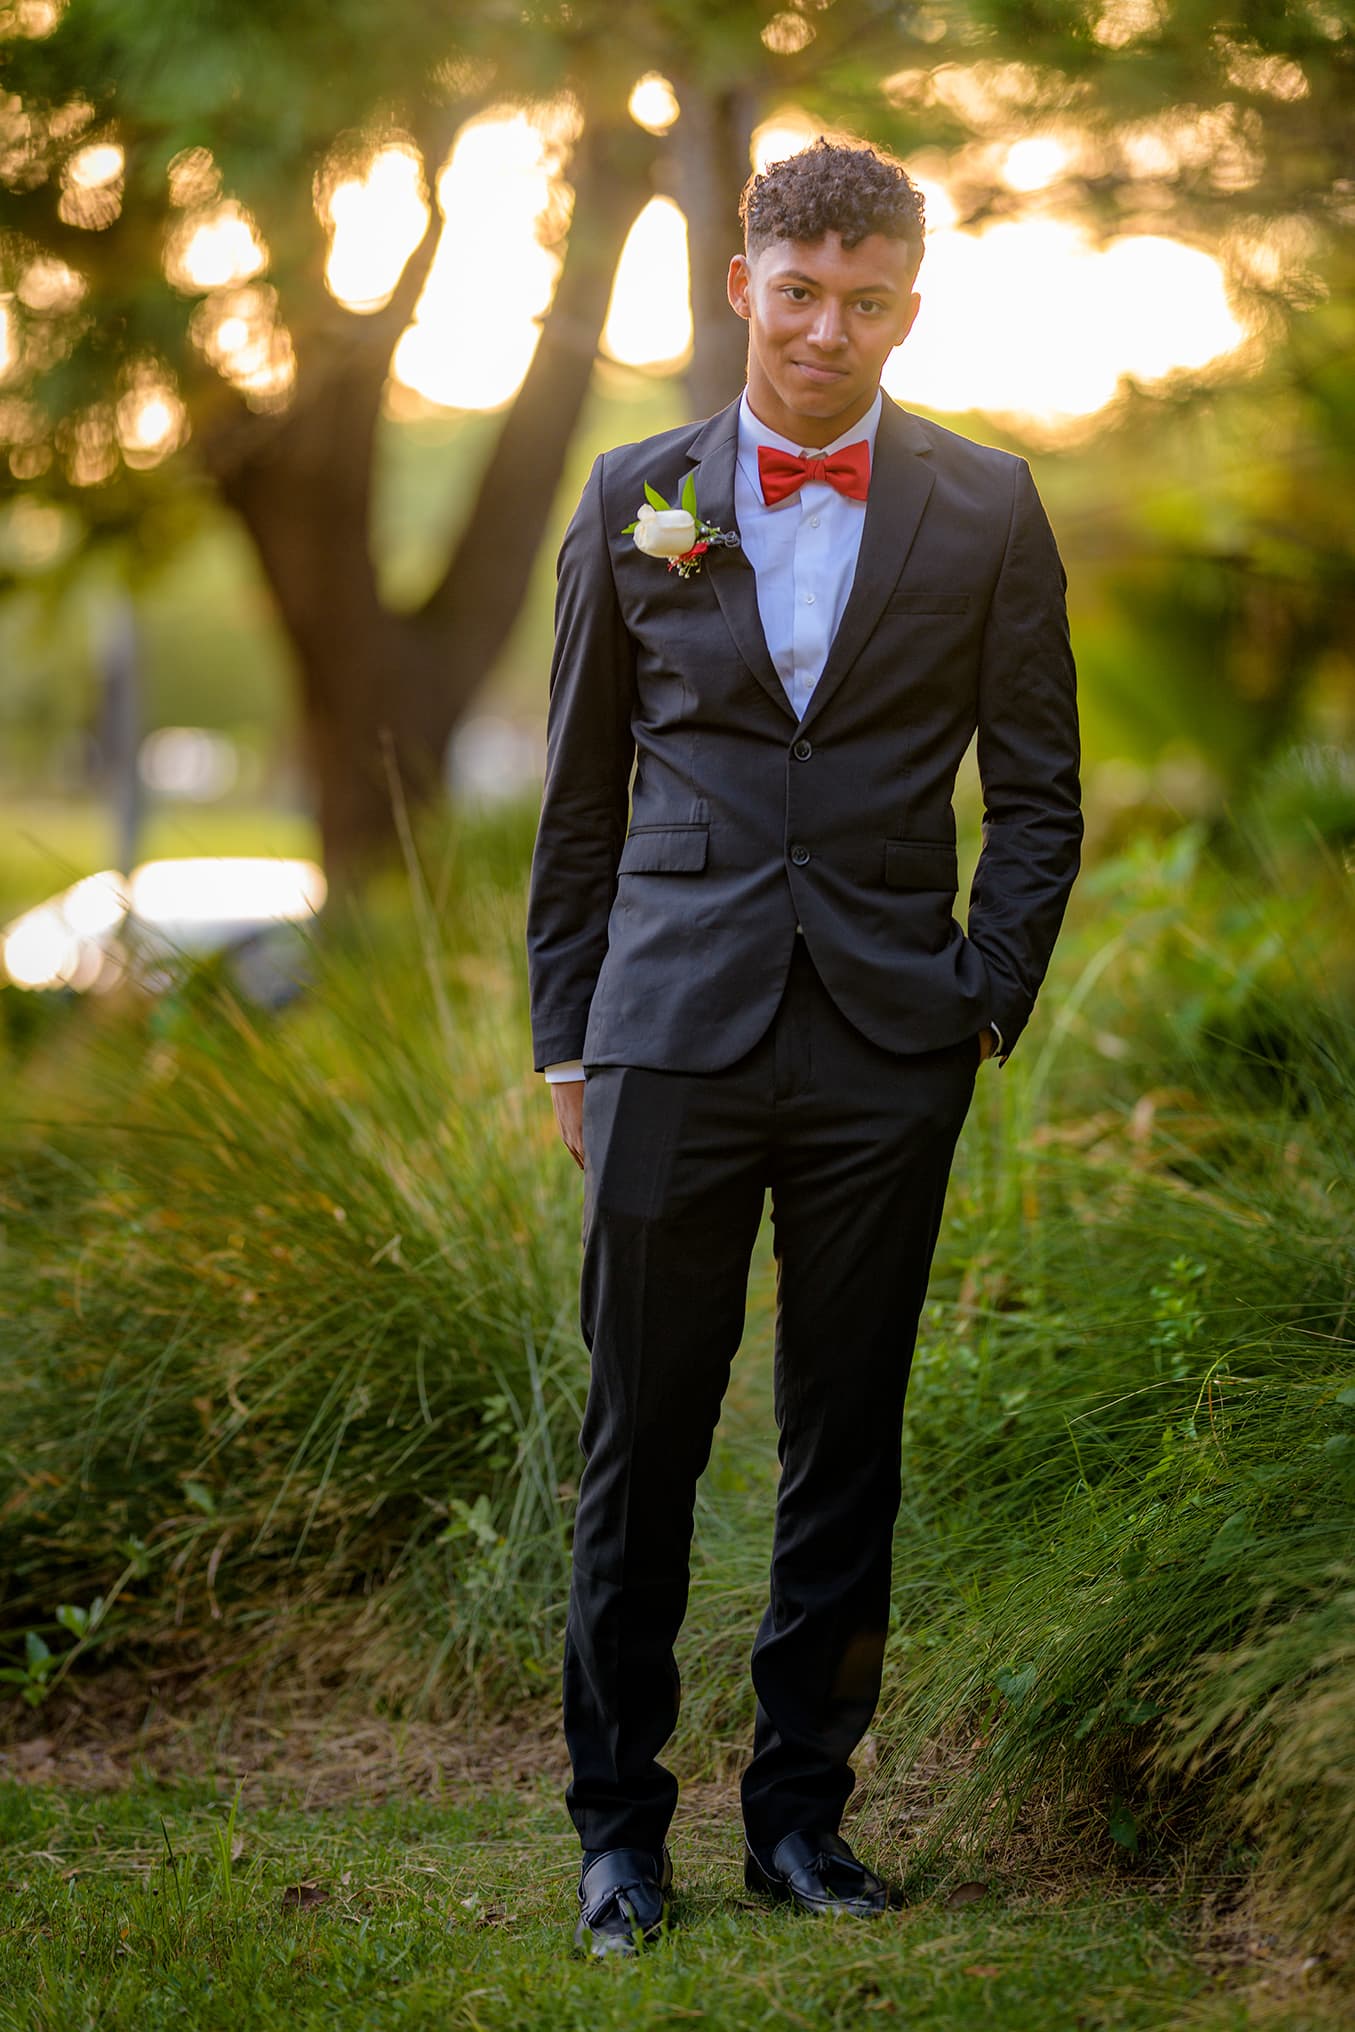 prom date red bow tie and boutonniere sunset golden hour